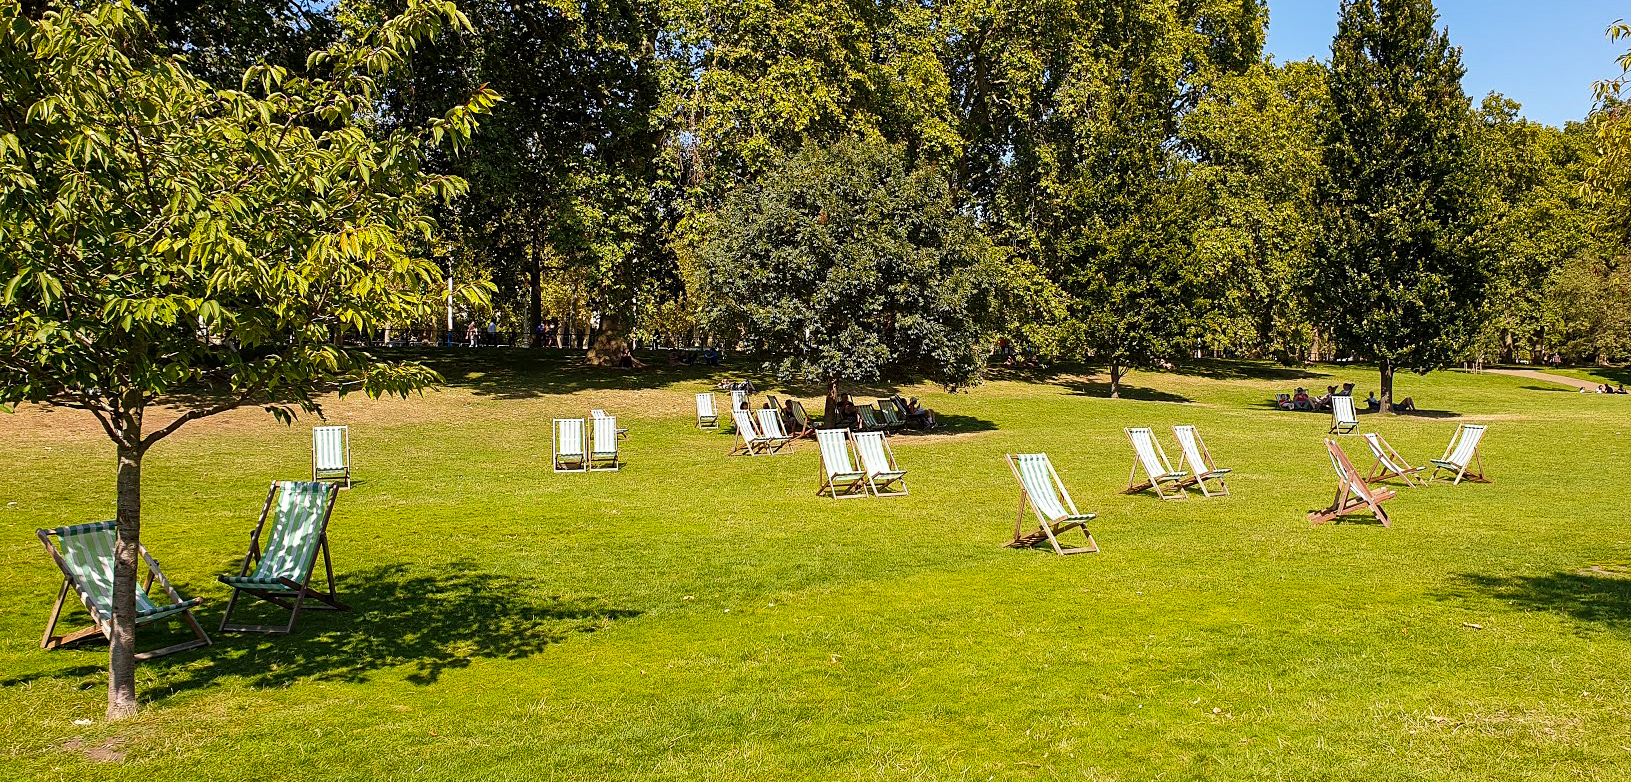 Deck chairs on the grass in St James's Park